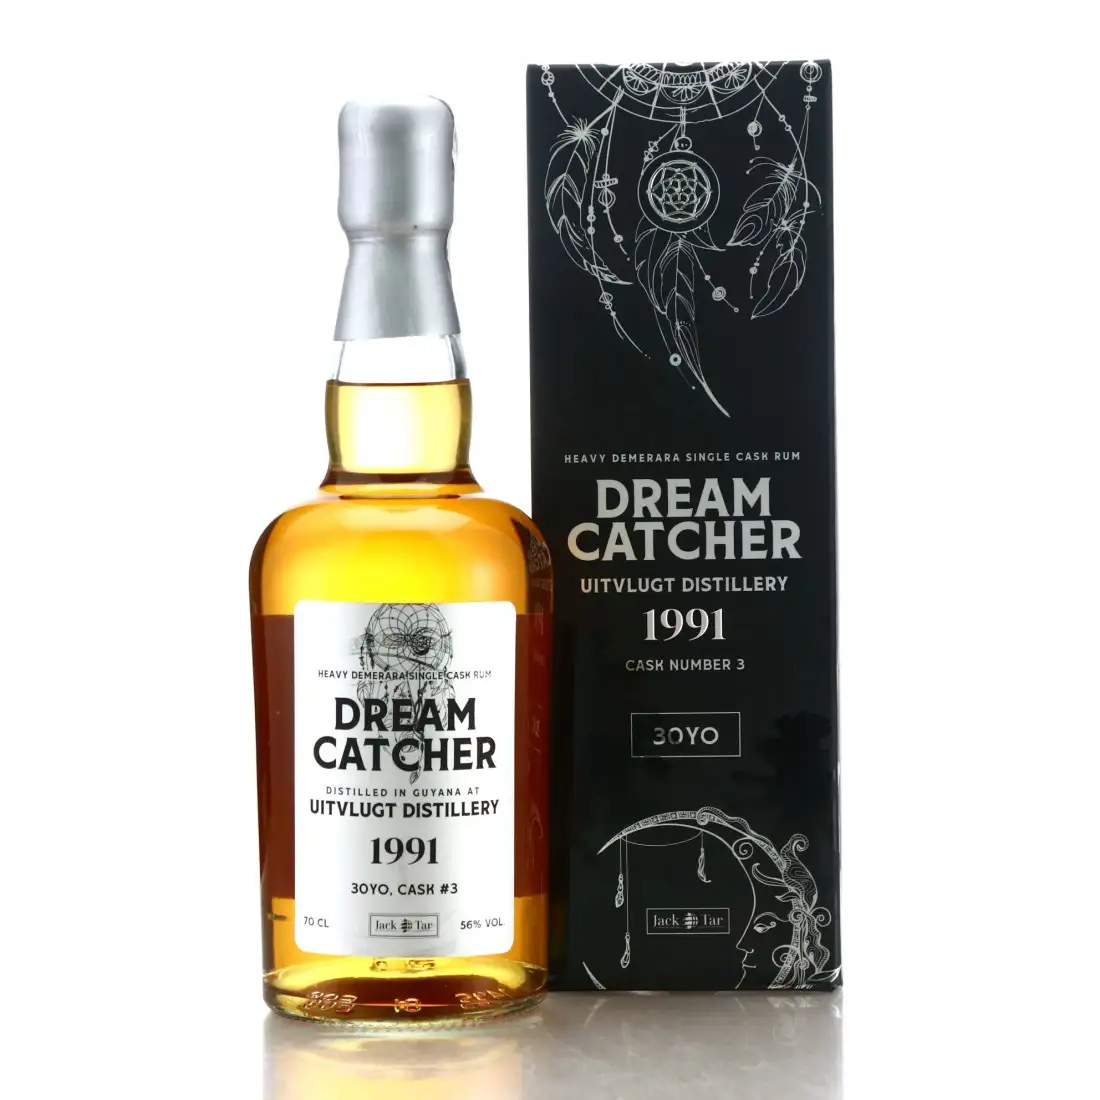 Image of the front of the bottle of the rum Dream Catcher